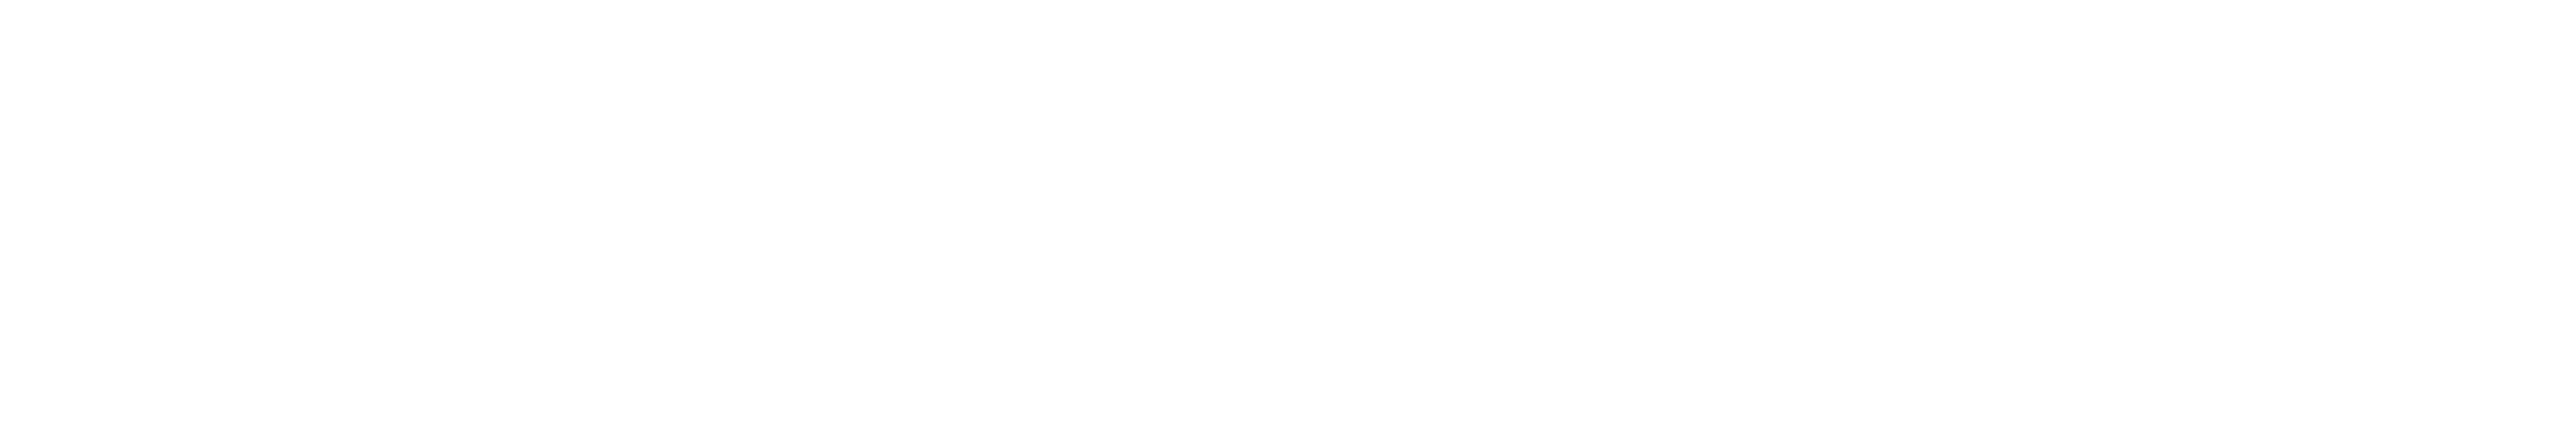 CEH early years and education logo